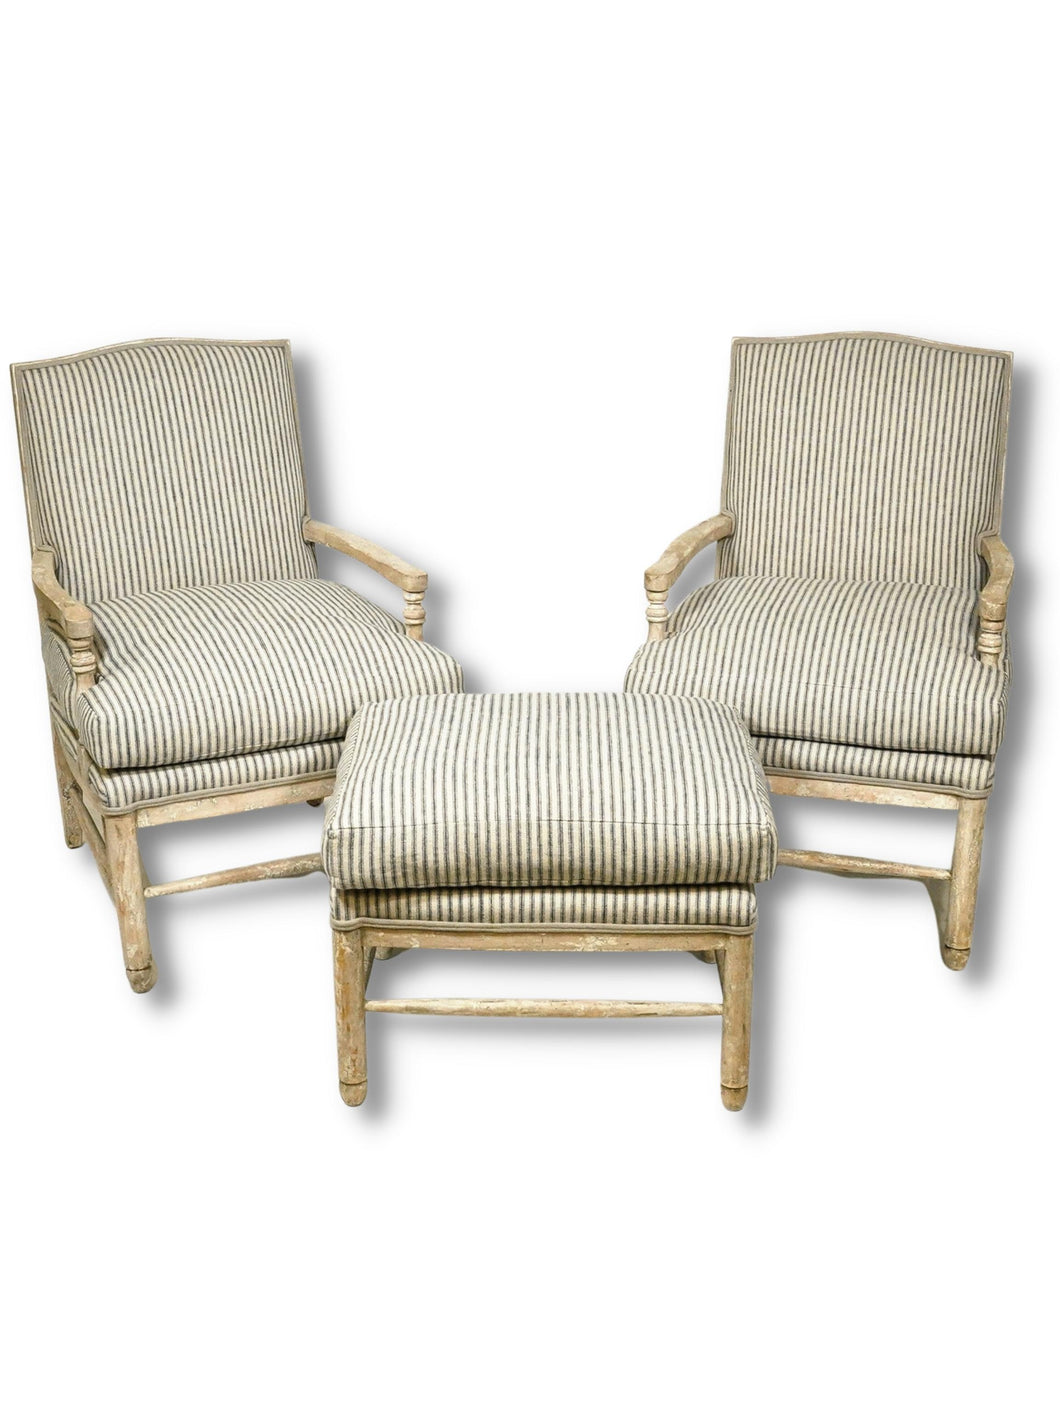 Pair of French Country Lounge Chairs with Matching Ottoman (Set)